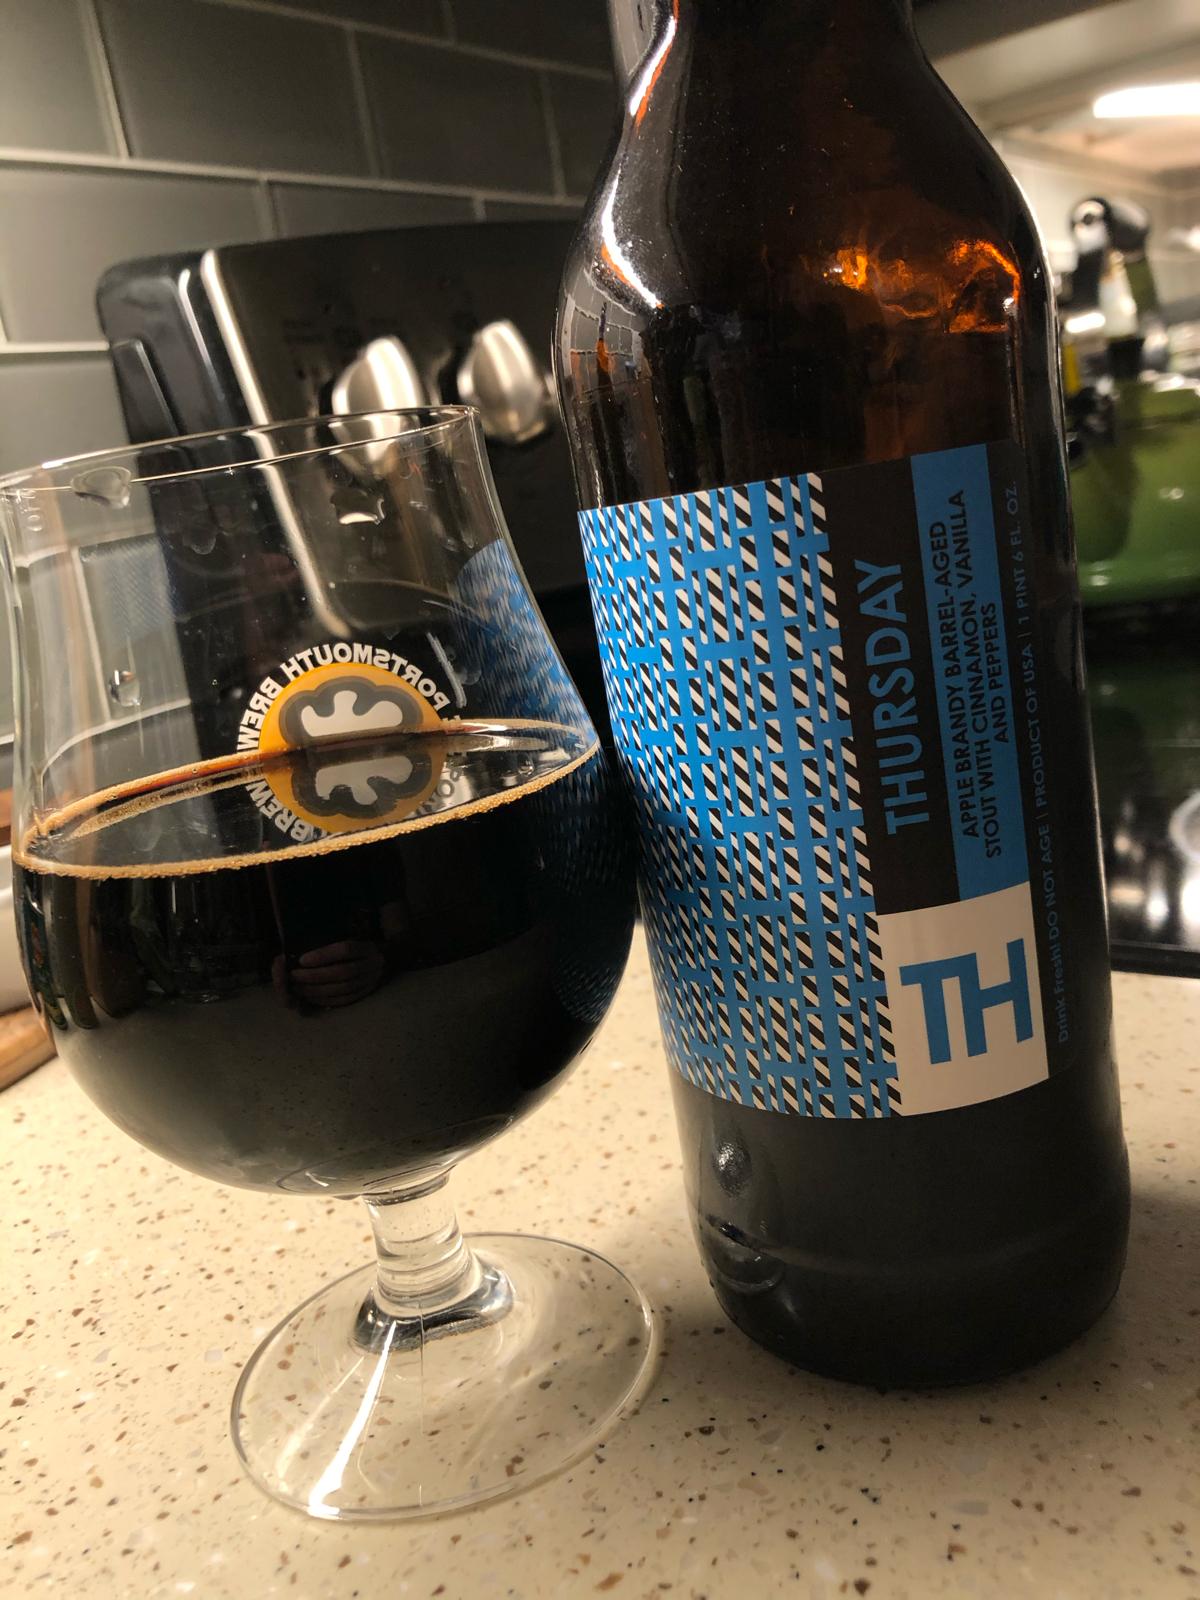 Thursday (2020) - Apple Brandy BA Imperial Stout w/ Cinnamon, Vanilla And Peppers